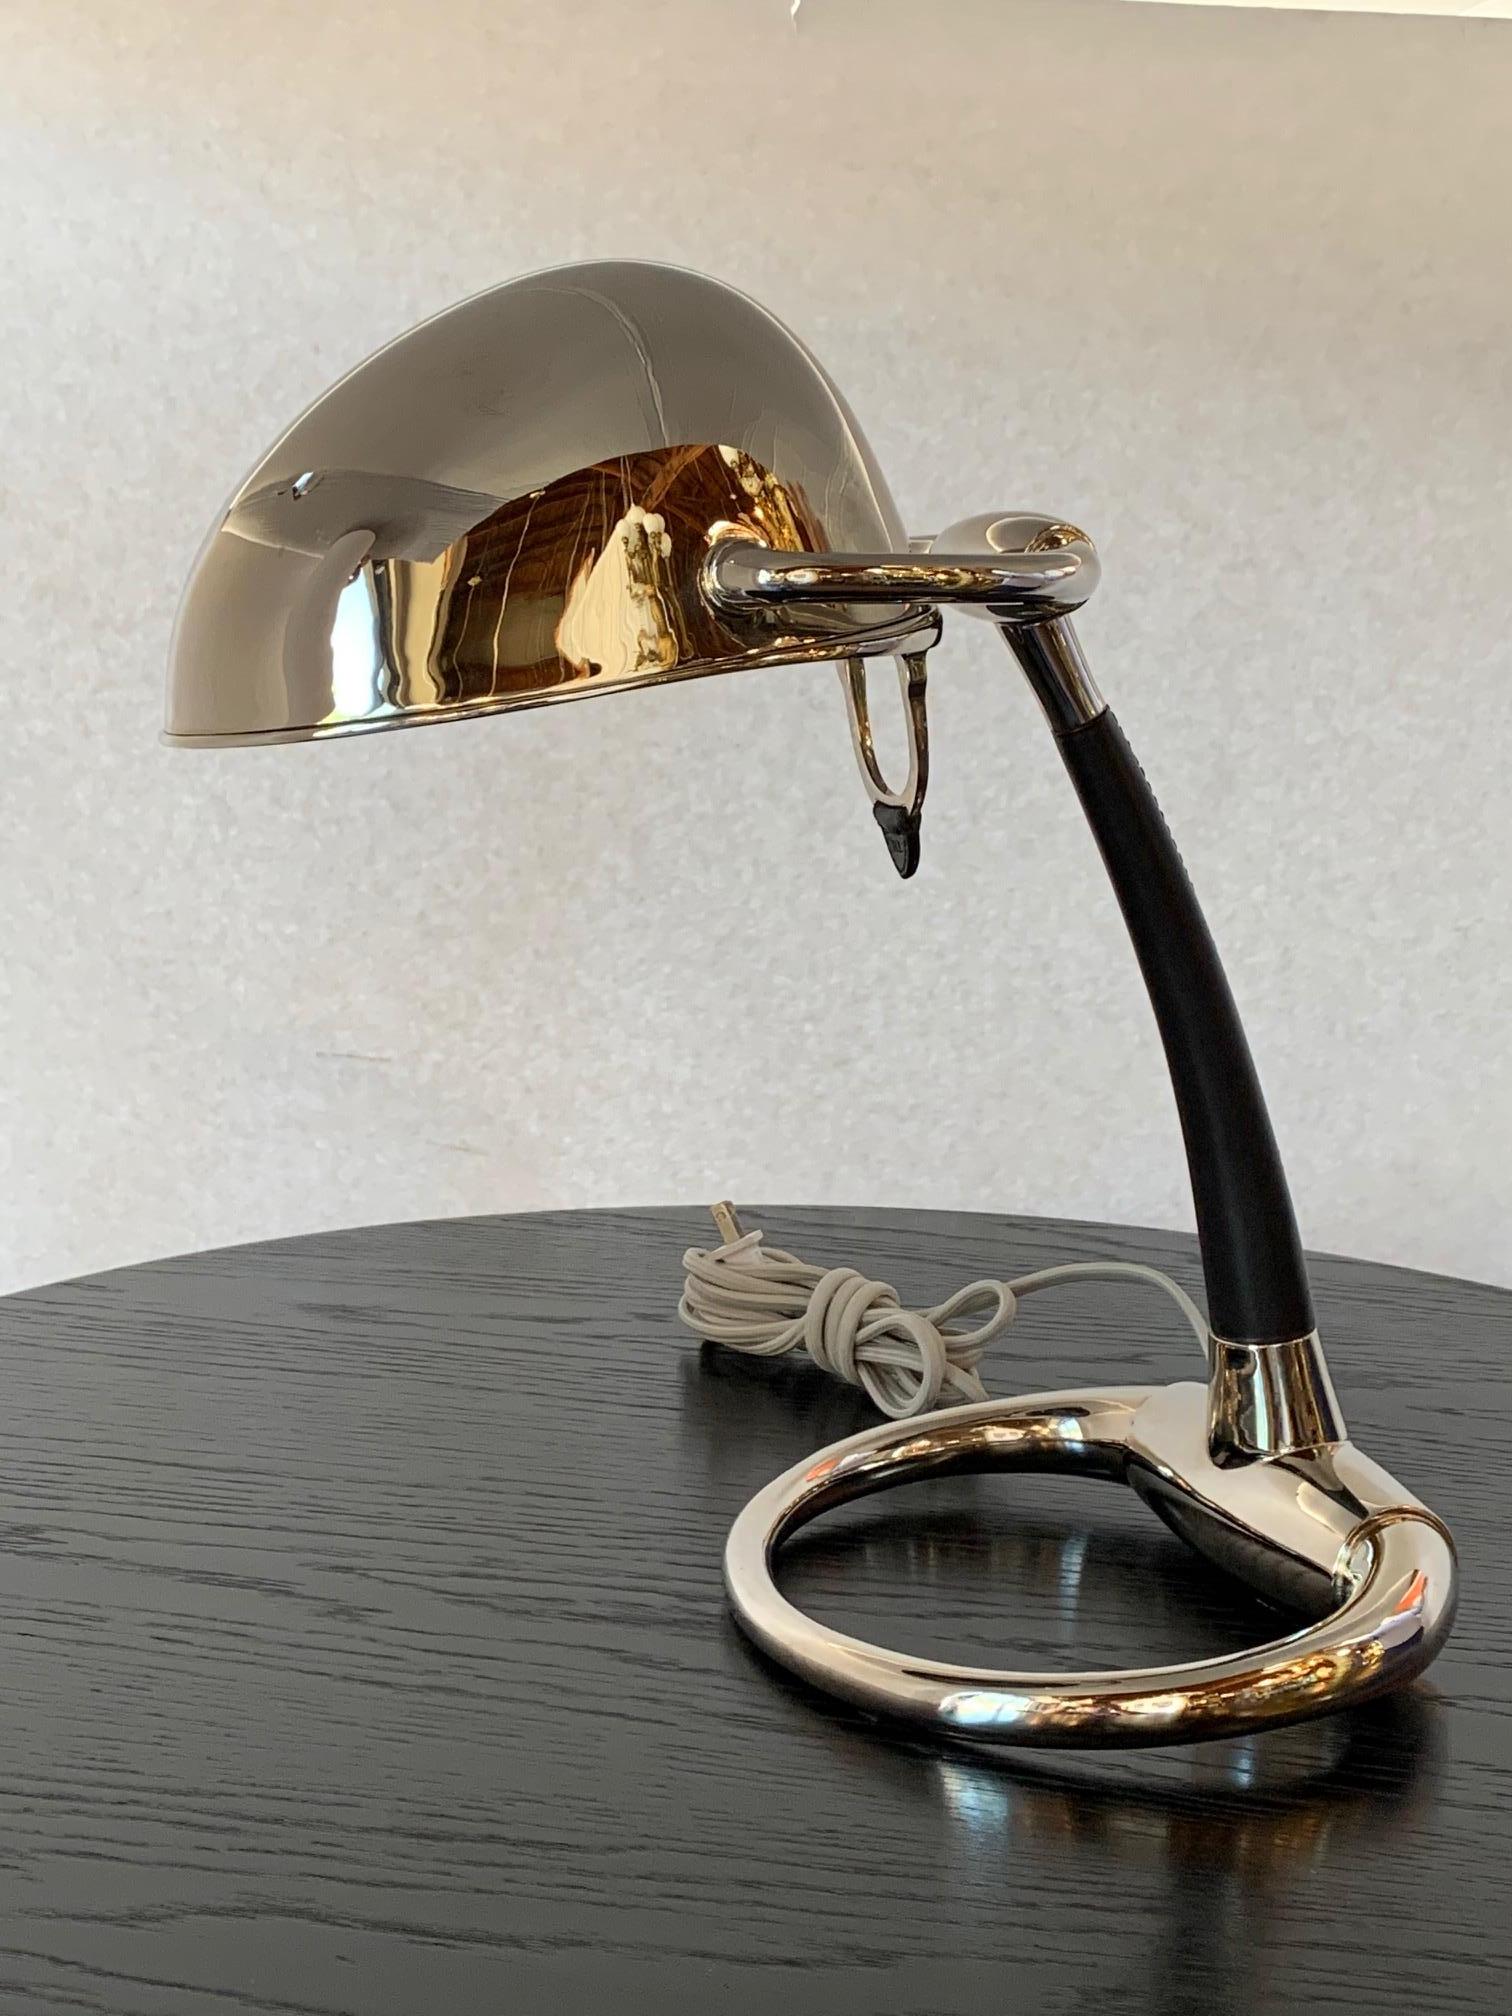 Table lamp by Ralph Lauren, N.Y.C. 1967.
Limited edition nickel-plated.